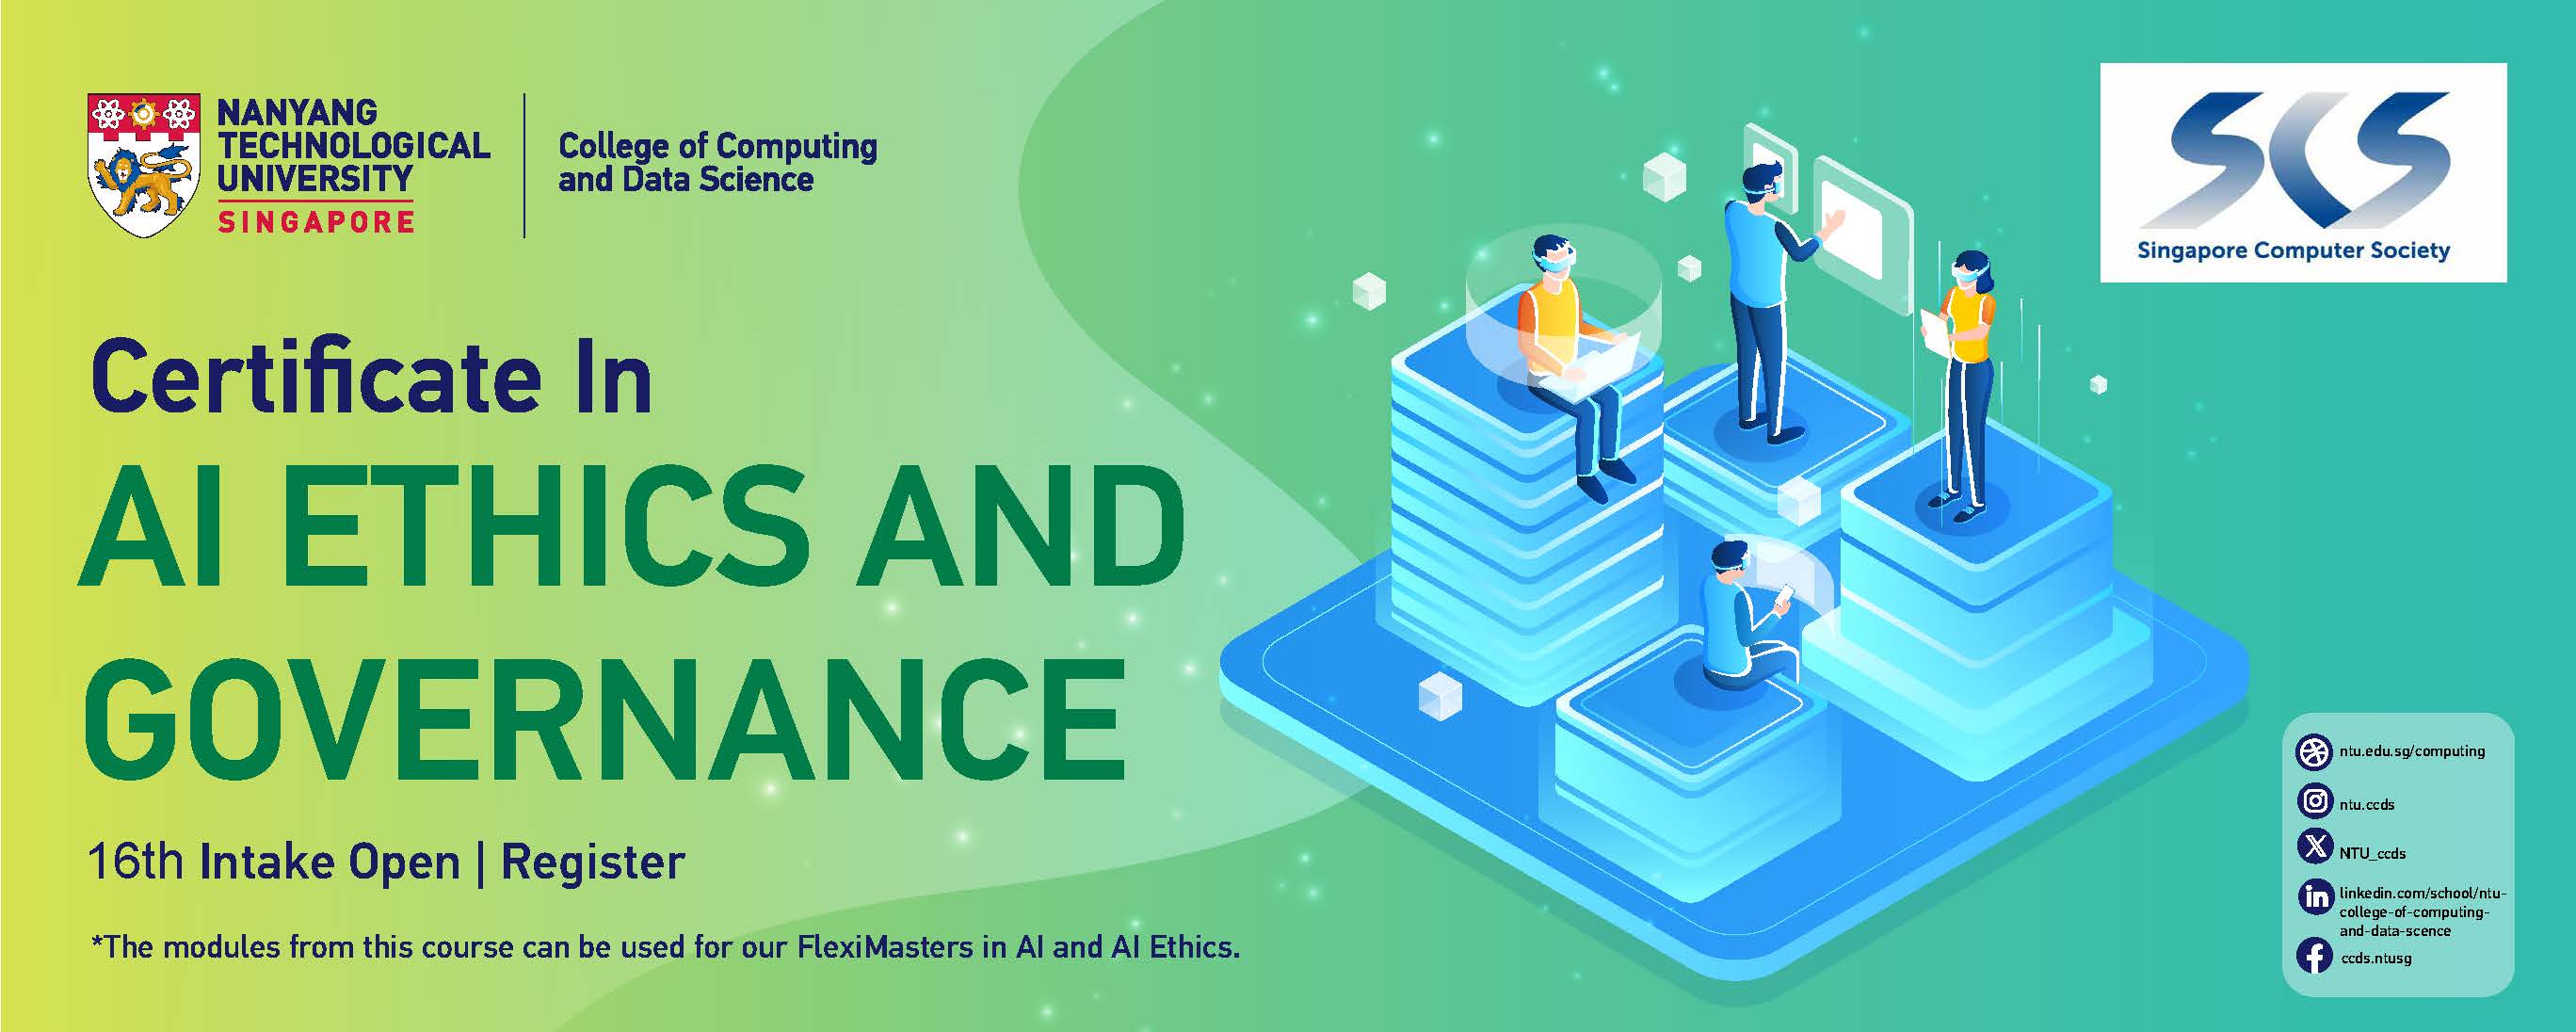 Certificate in AI Ethics and Governance